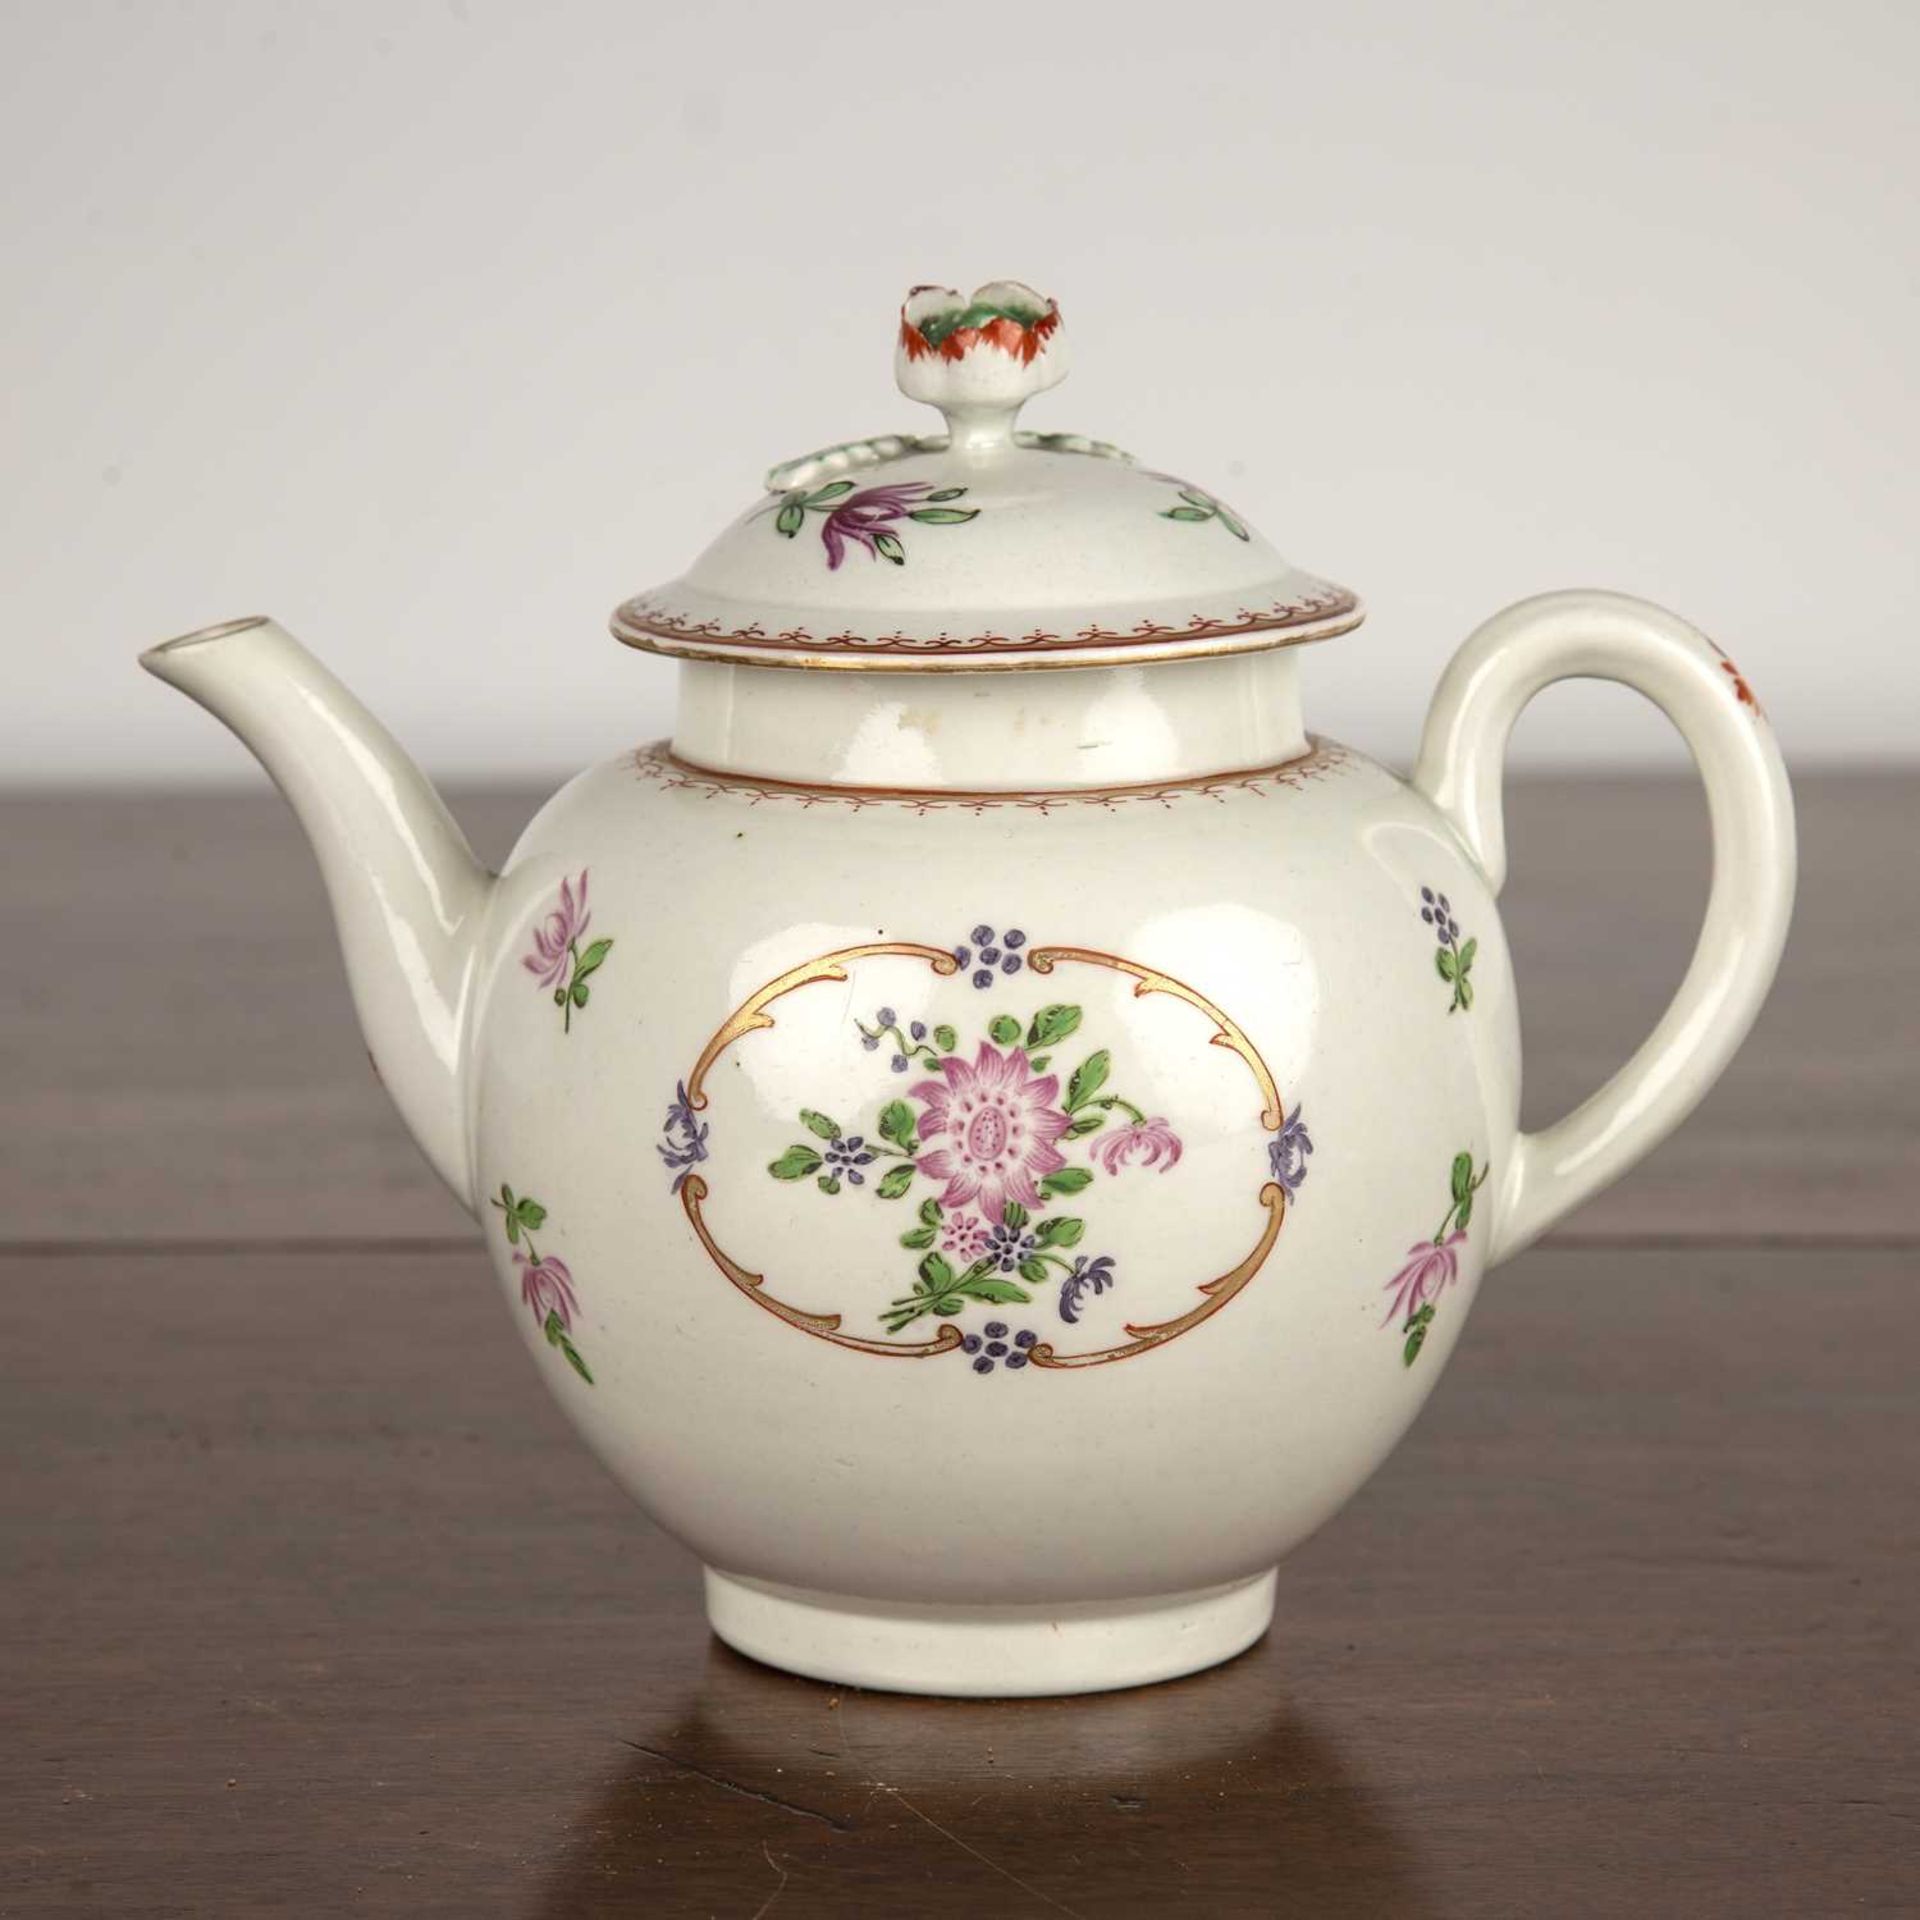 Porcelain teapot, probably Worcester circa 1770, painted with panels of flowers and with flower